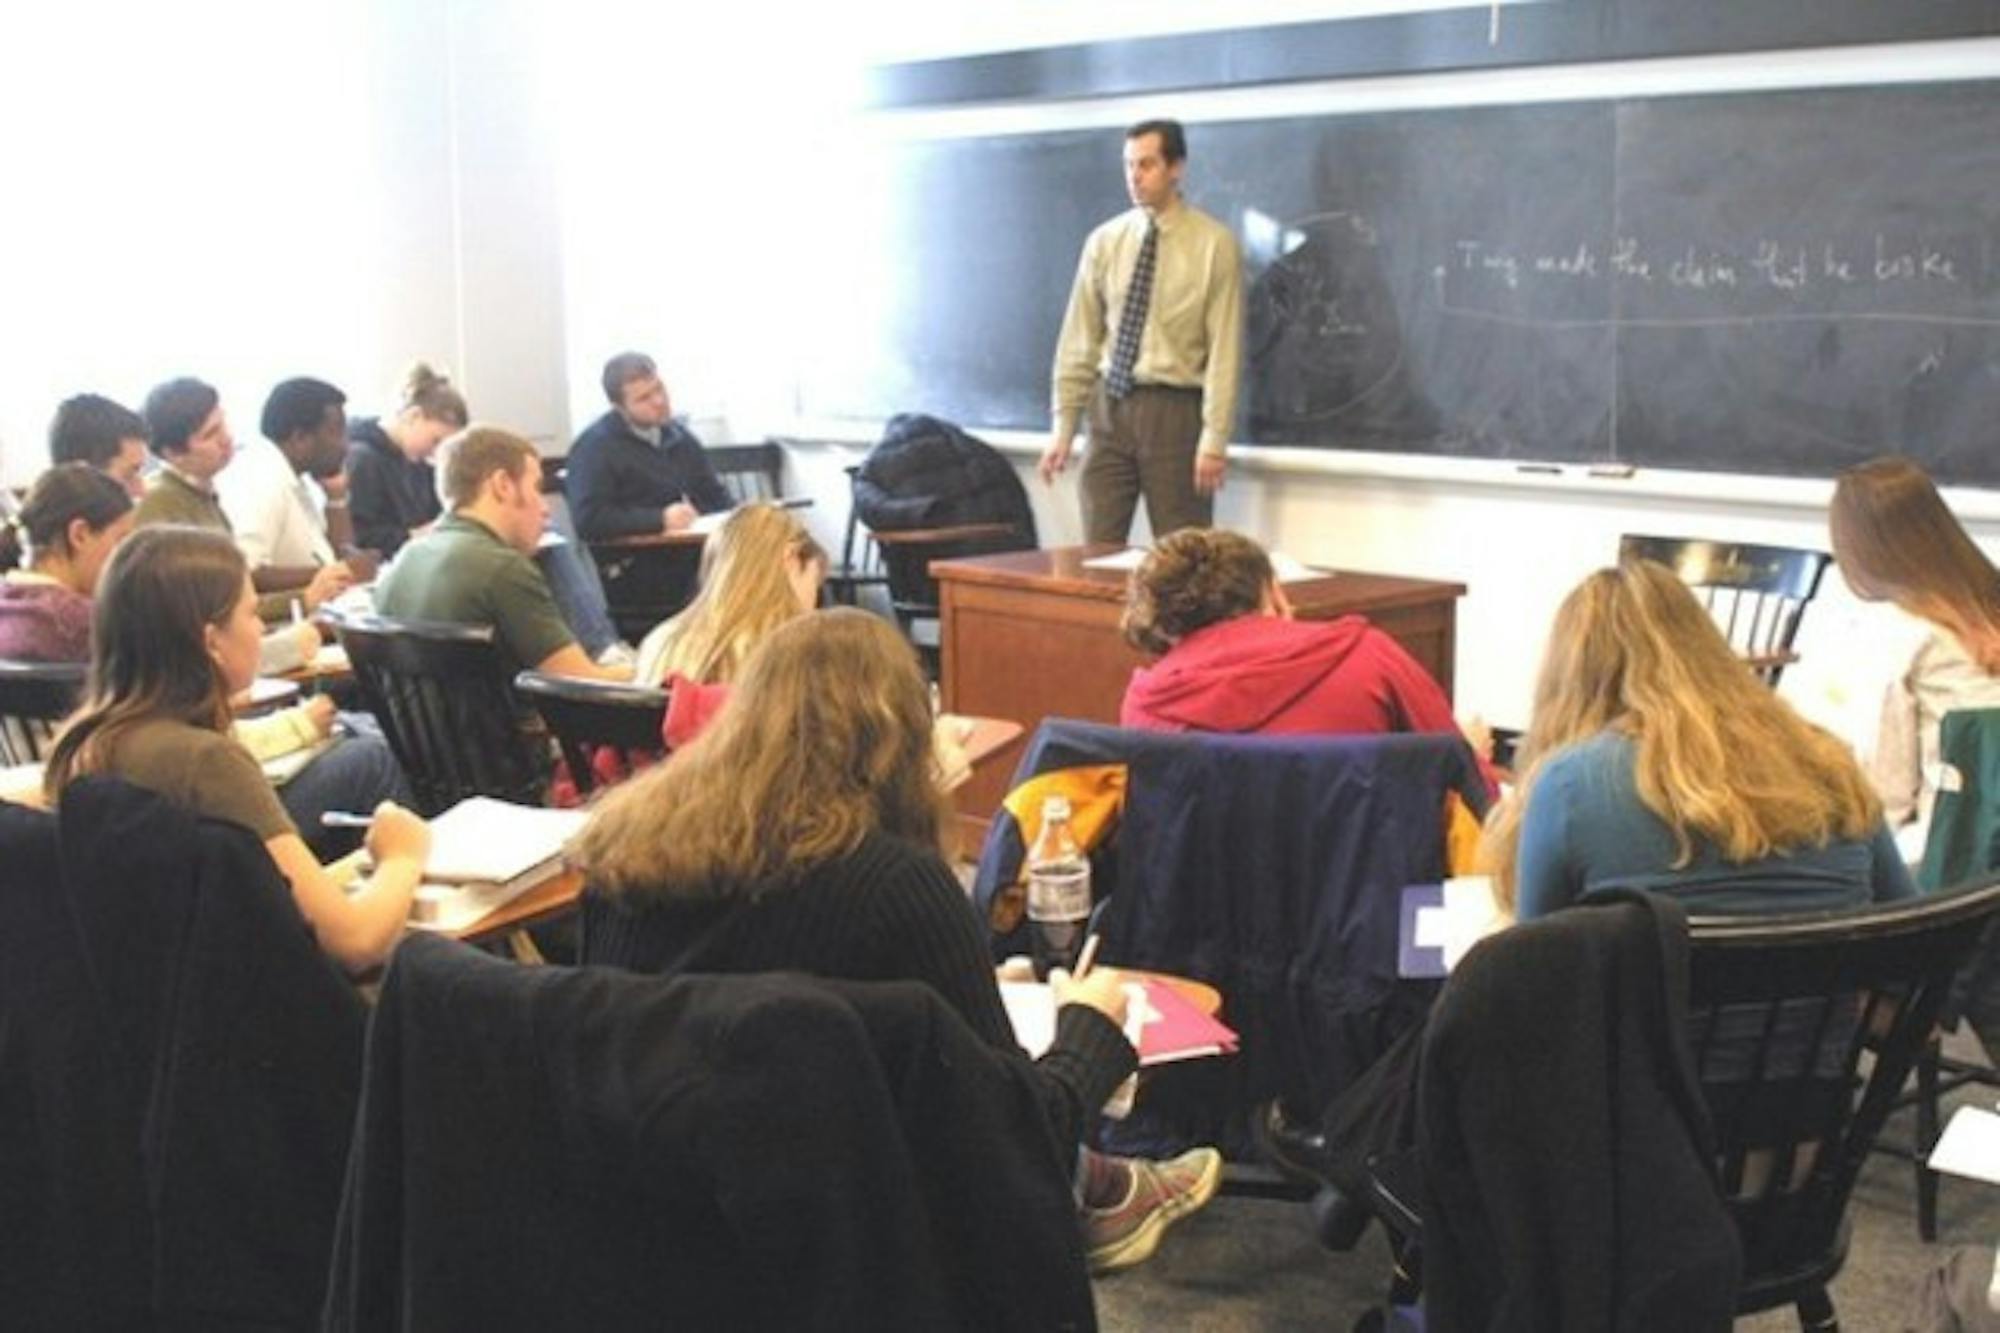 Most classes take place Friday as professors often encourage student attendance on Homecoming.